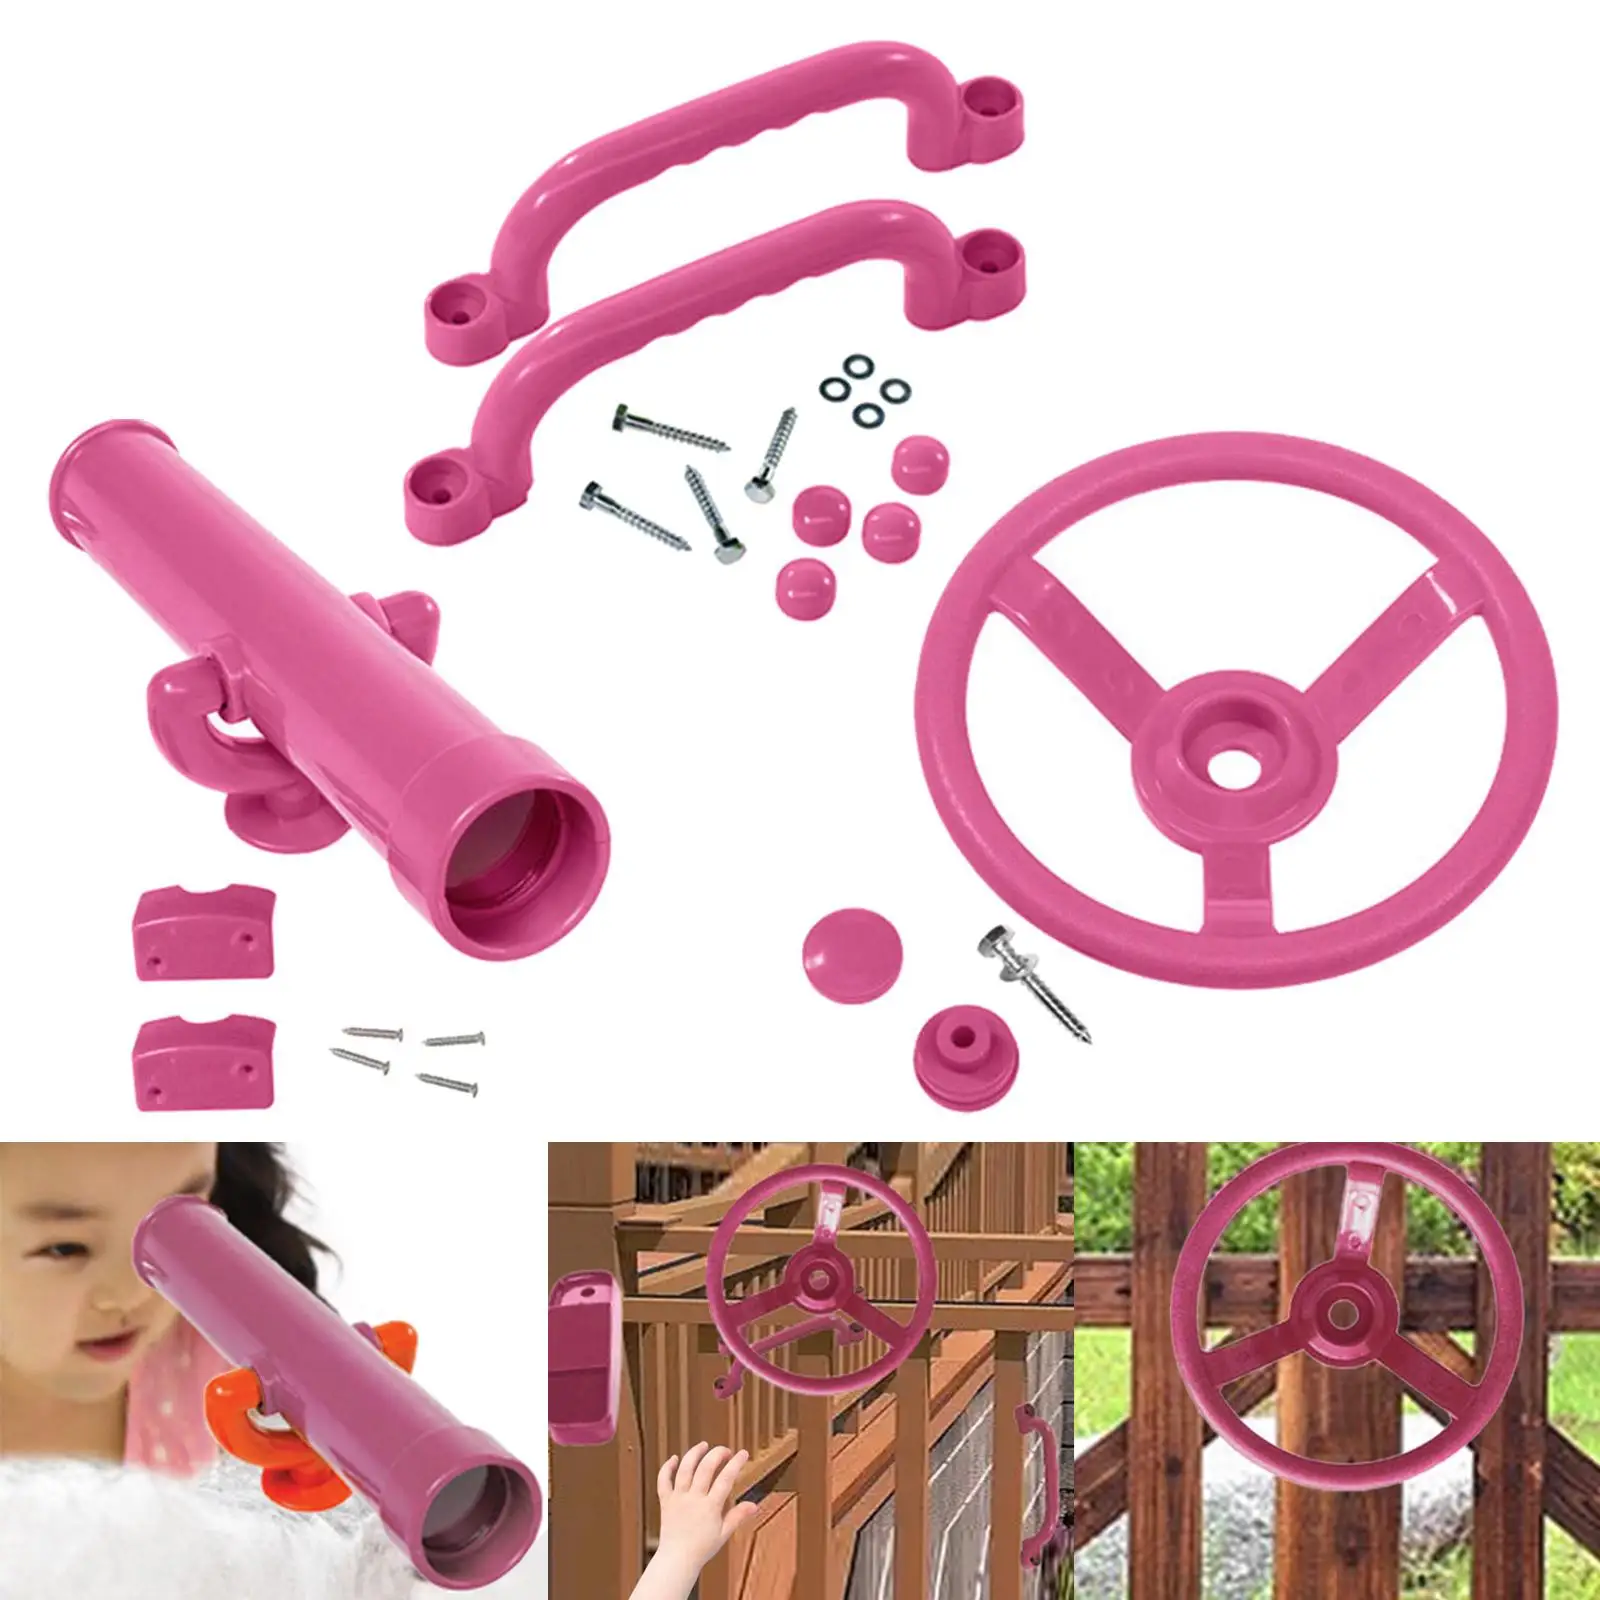 Playground Accessories Pirate Ship Wheel for Kids Swingset Attachments for Tree House Playhouse Climbing Frame Backyard Parts